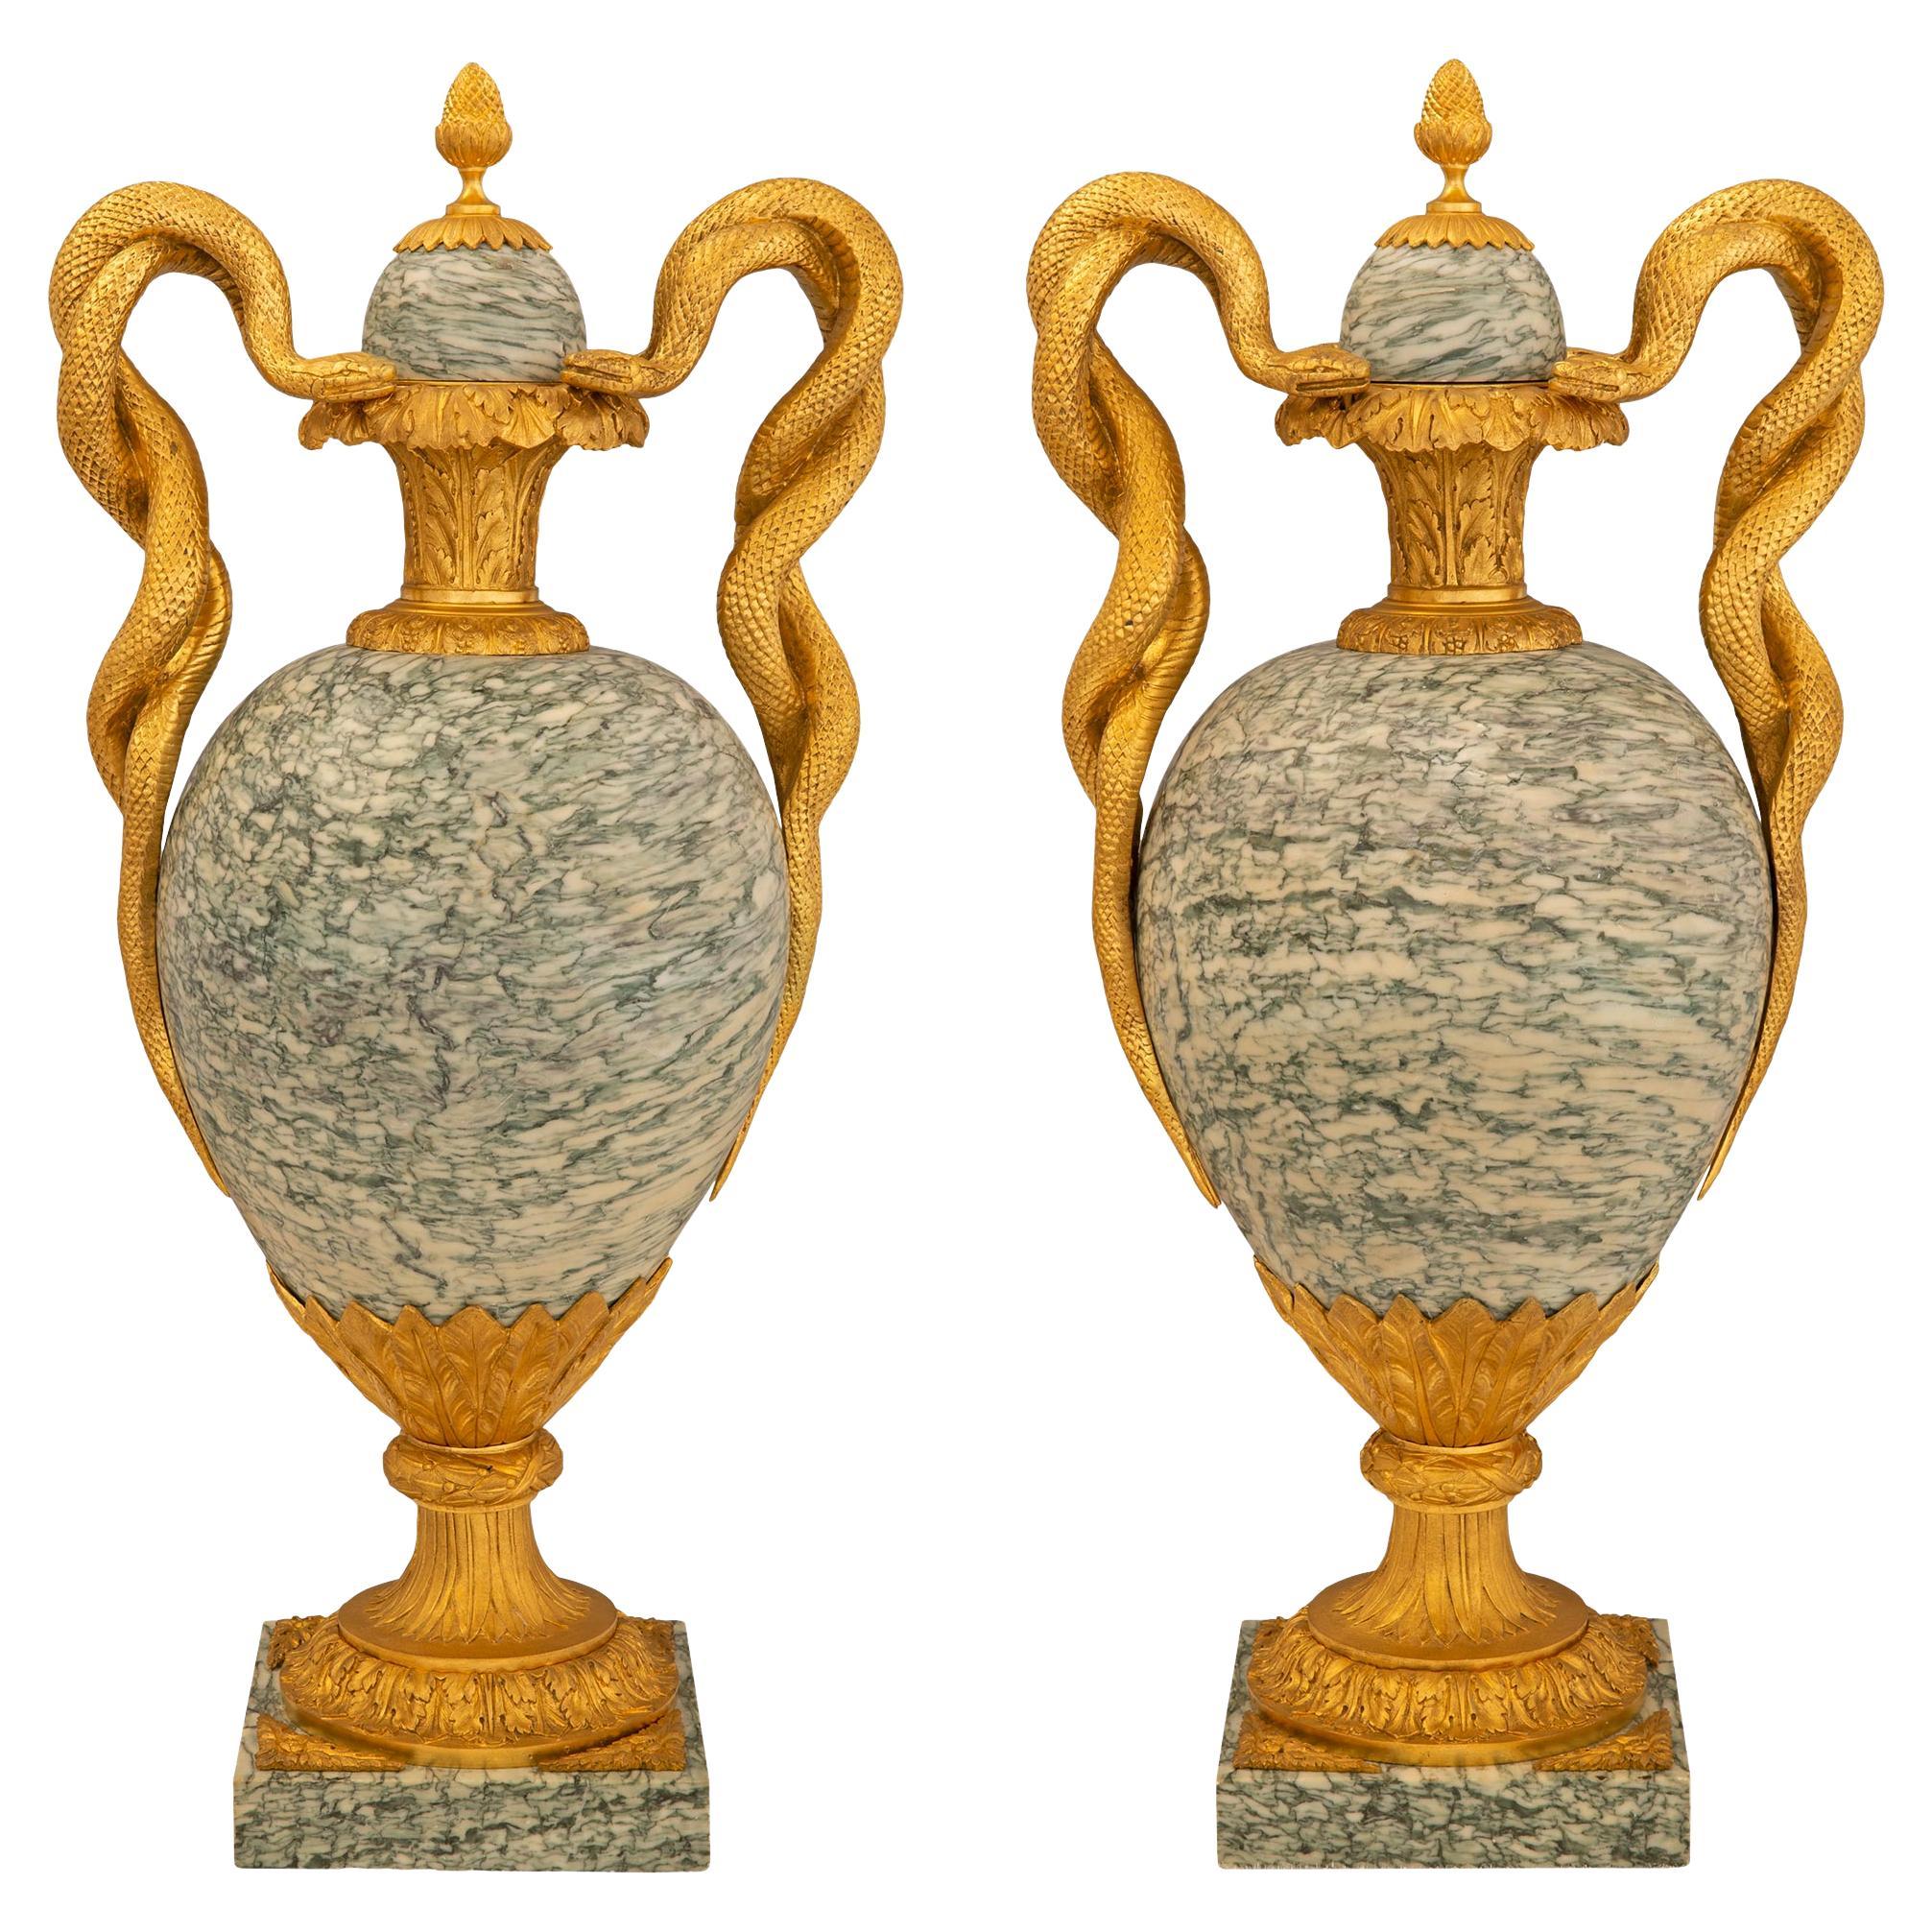 Pair Of French 19th Century Belle Époque Period Ormolu And Marble Lidded Urns For Sale